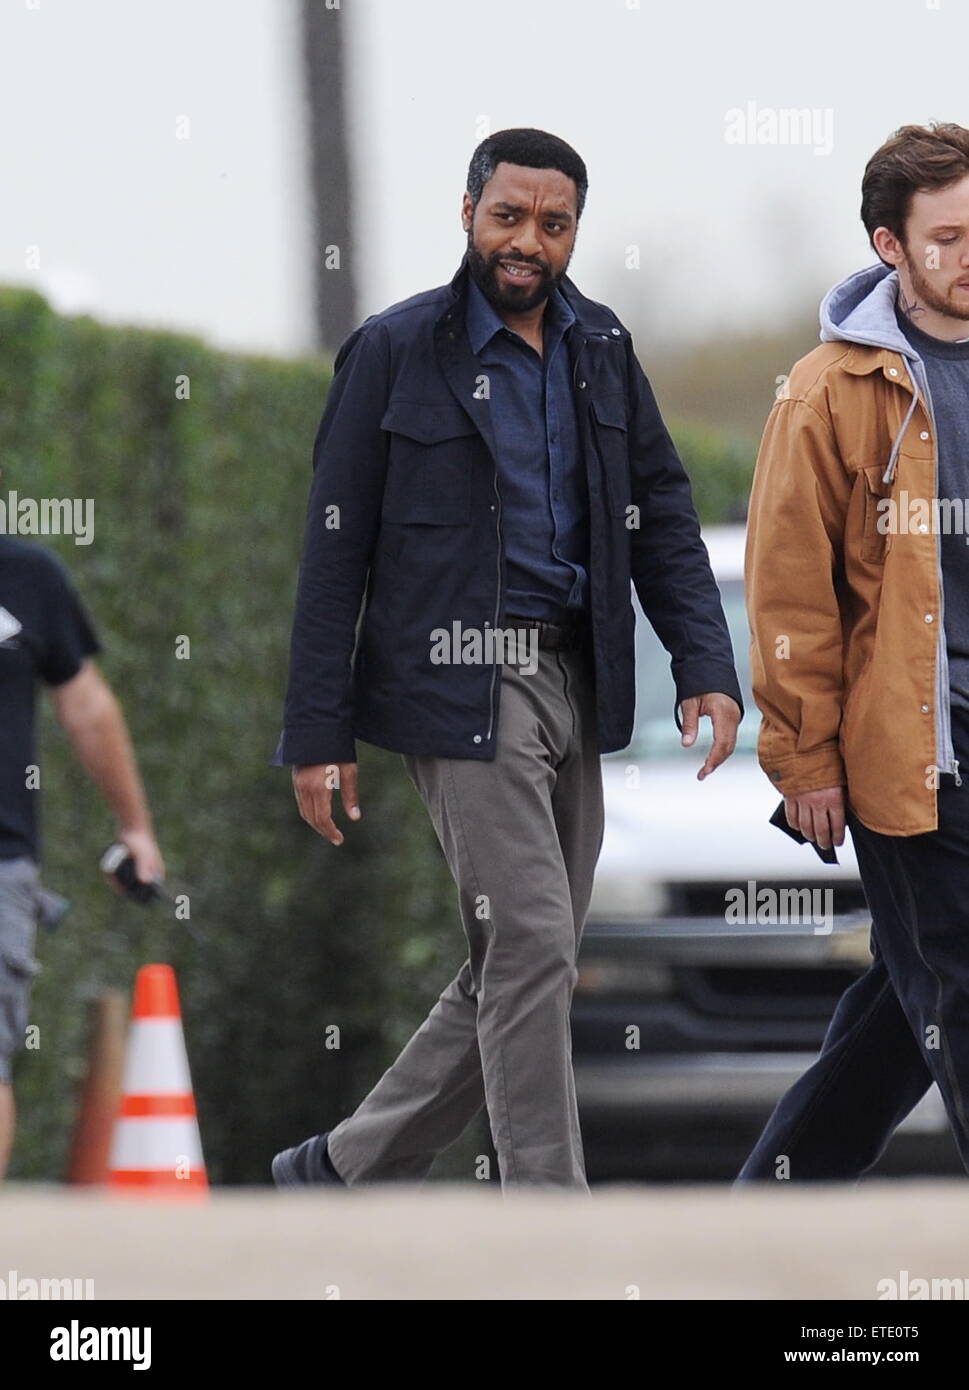 Oscar nominee '12 Years A Slave' star Chiwetel Ejiofor spotted on the set of 'The Secret In Their Eyes' filming in Pasadena Ca. The actor was joined by co star Dean Norris from 'Breaking Bad' and Daniel Moder as the cinematographer for the film. Daniel's famous wife Julia Roberts is also casted for the film.  Featuring: Chiwetel Ejiofor Where: Pasadena, California, United States When: 28 Jan 2015 Credit: Cousart/JFXimages/WENN.com Stock Photo